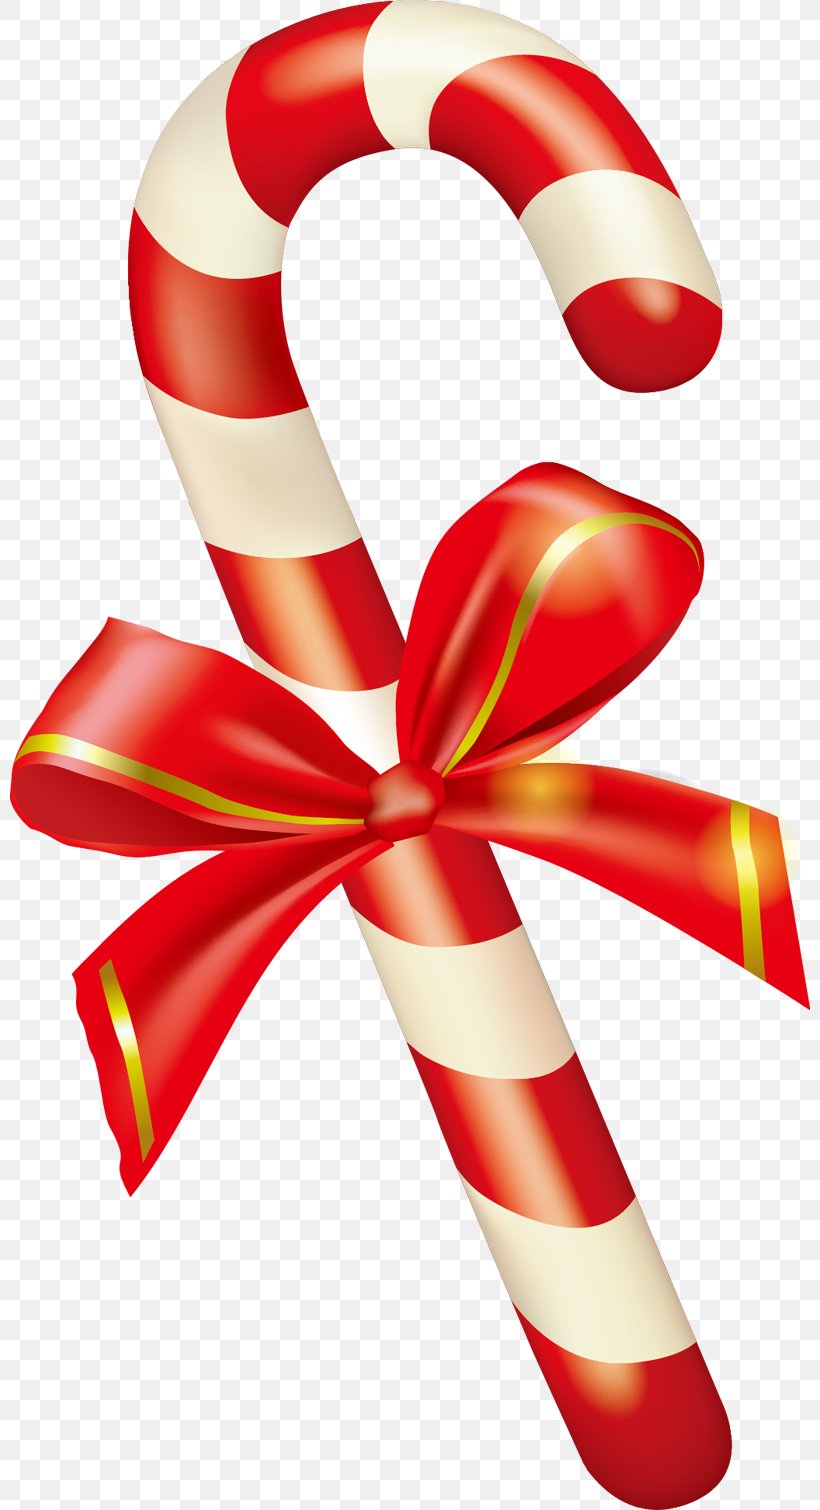 Candy Cane Christmas Clip Art, PNG, 800x1510px, Candy Cane